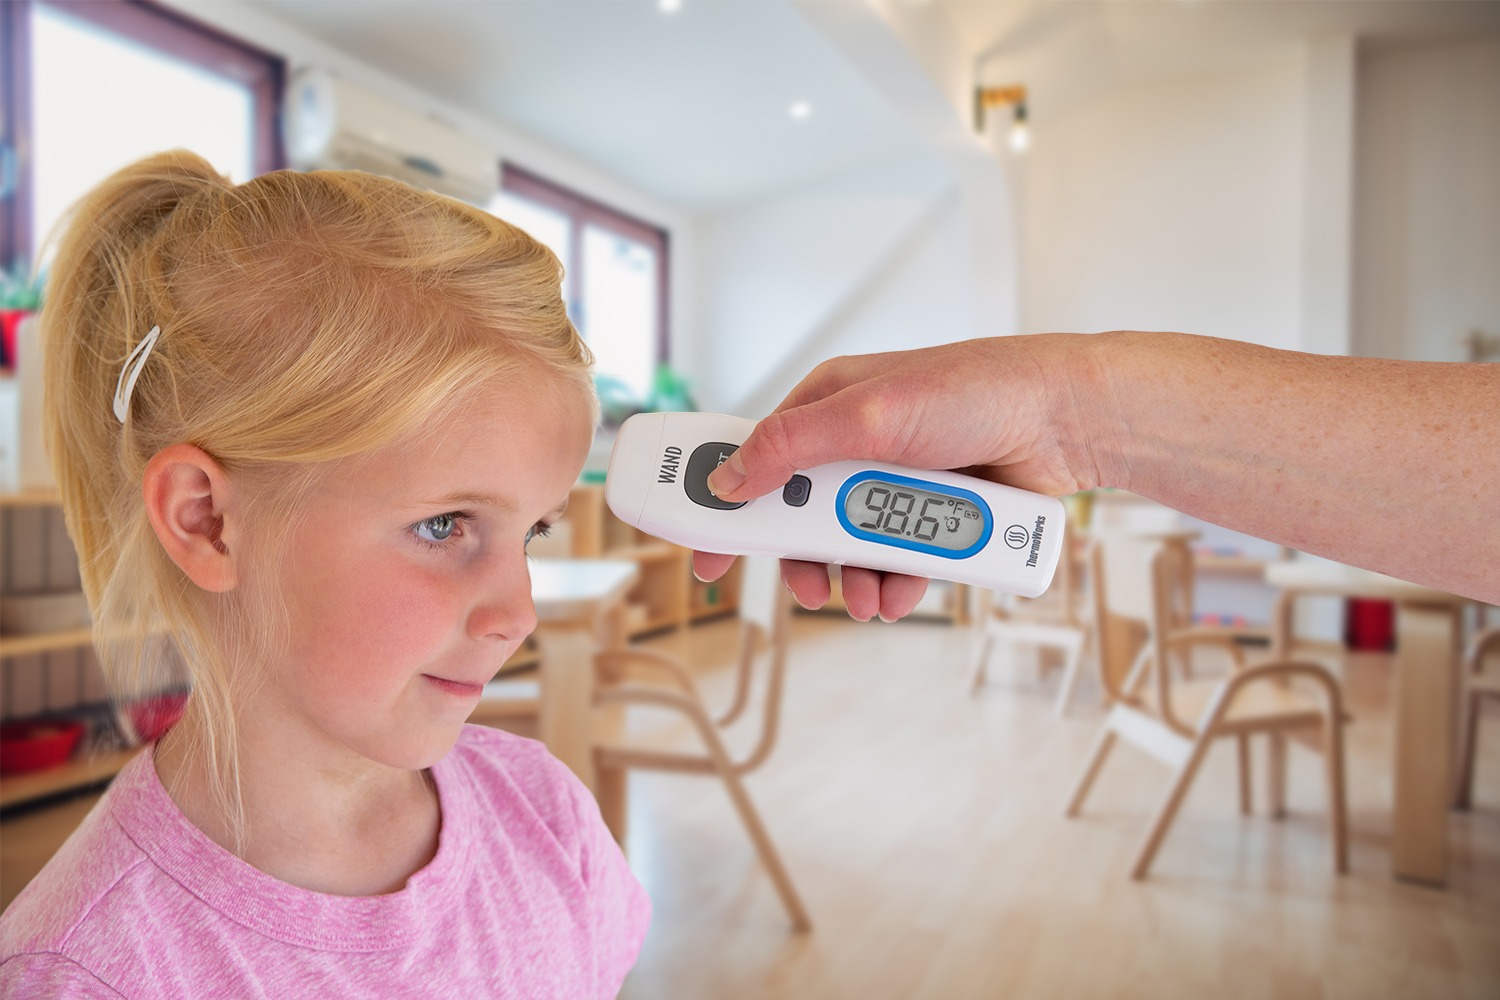 Tips Best Results with Non-Contact Forehead Thermometers